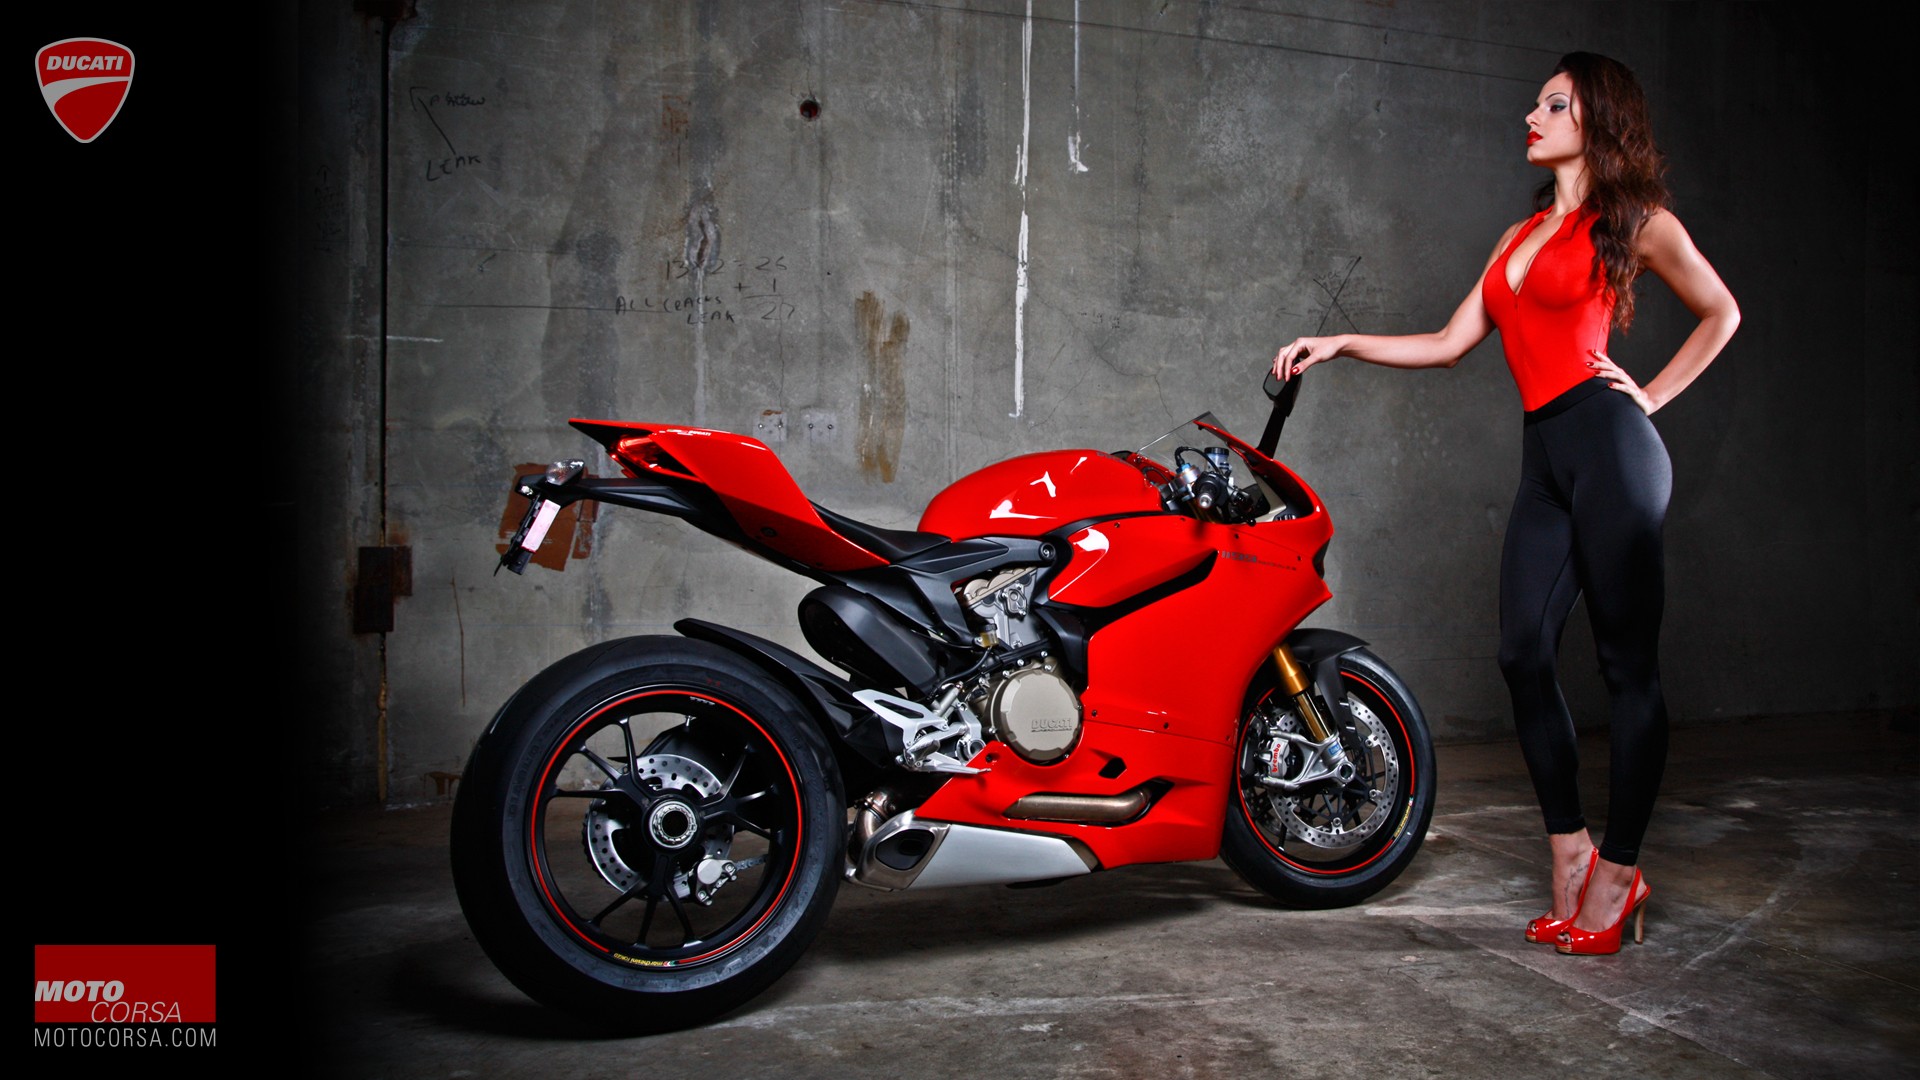 hands On Hips, Women With Bikes, Ducati 1199, Motorcycle, Tight Clothing, Red Heels, High Heels Wallpaper